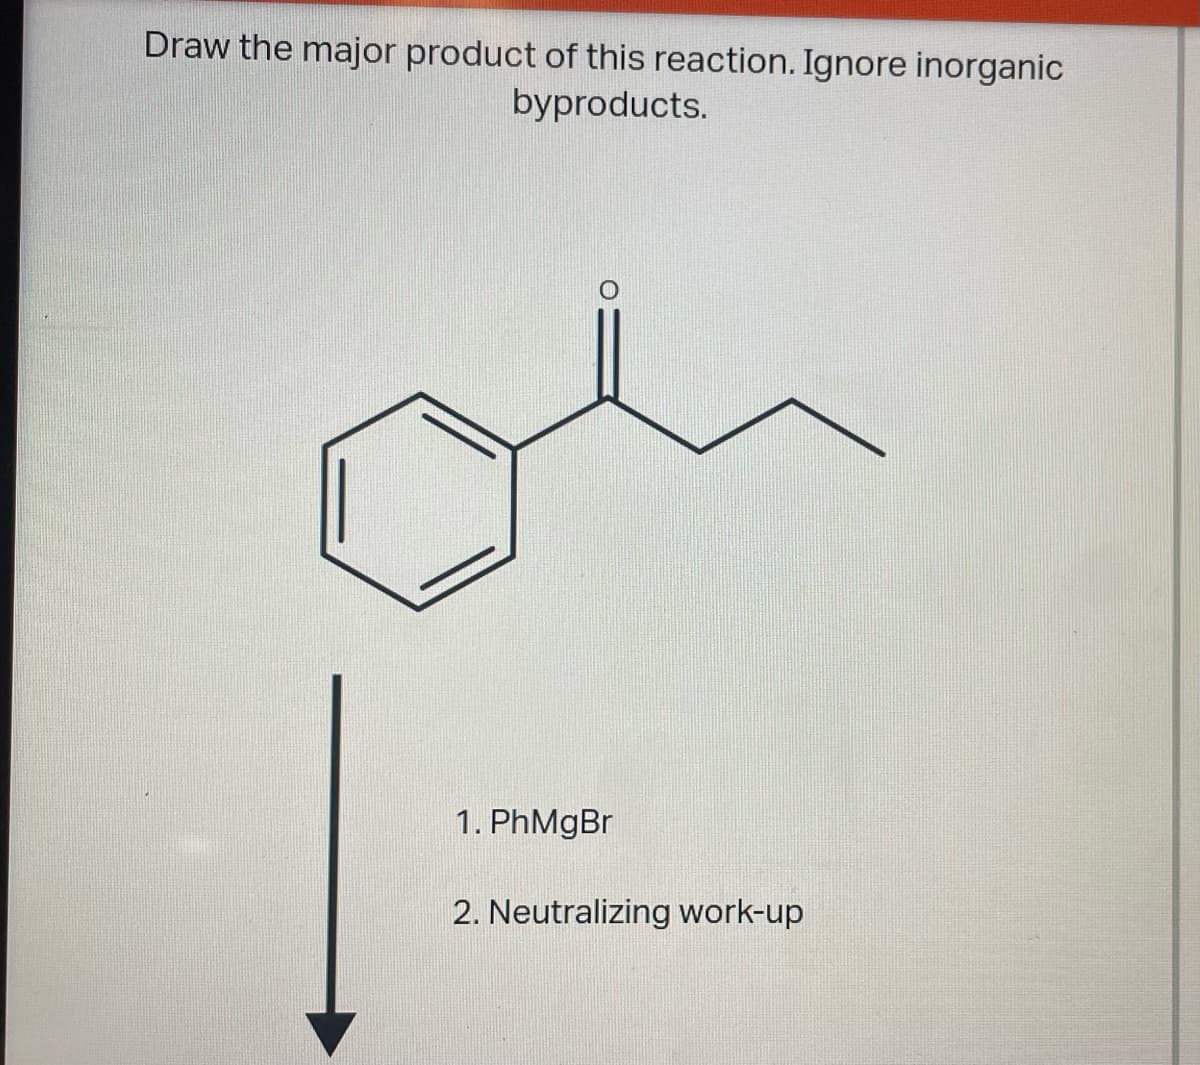 Draw the major product of this reaction. Ignore inorganic
byproducts.
1. PhMgBr
2. Neutralizing work-up